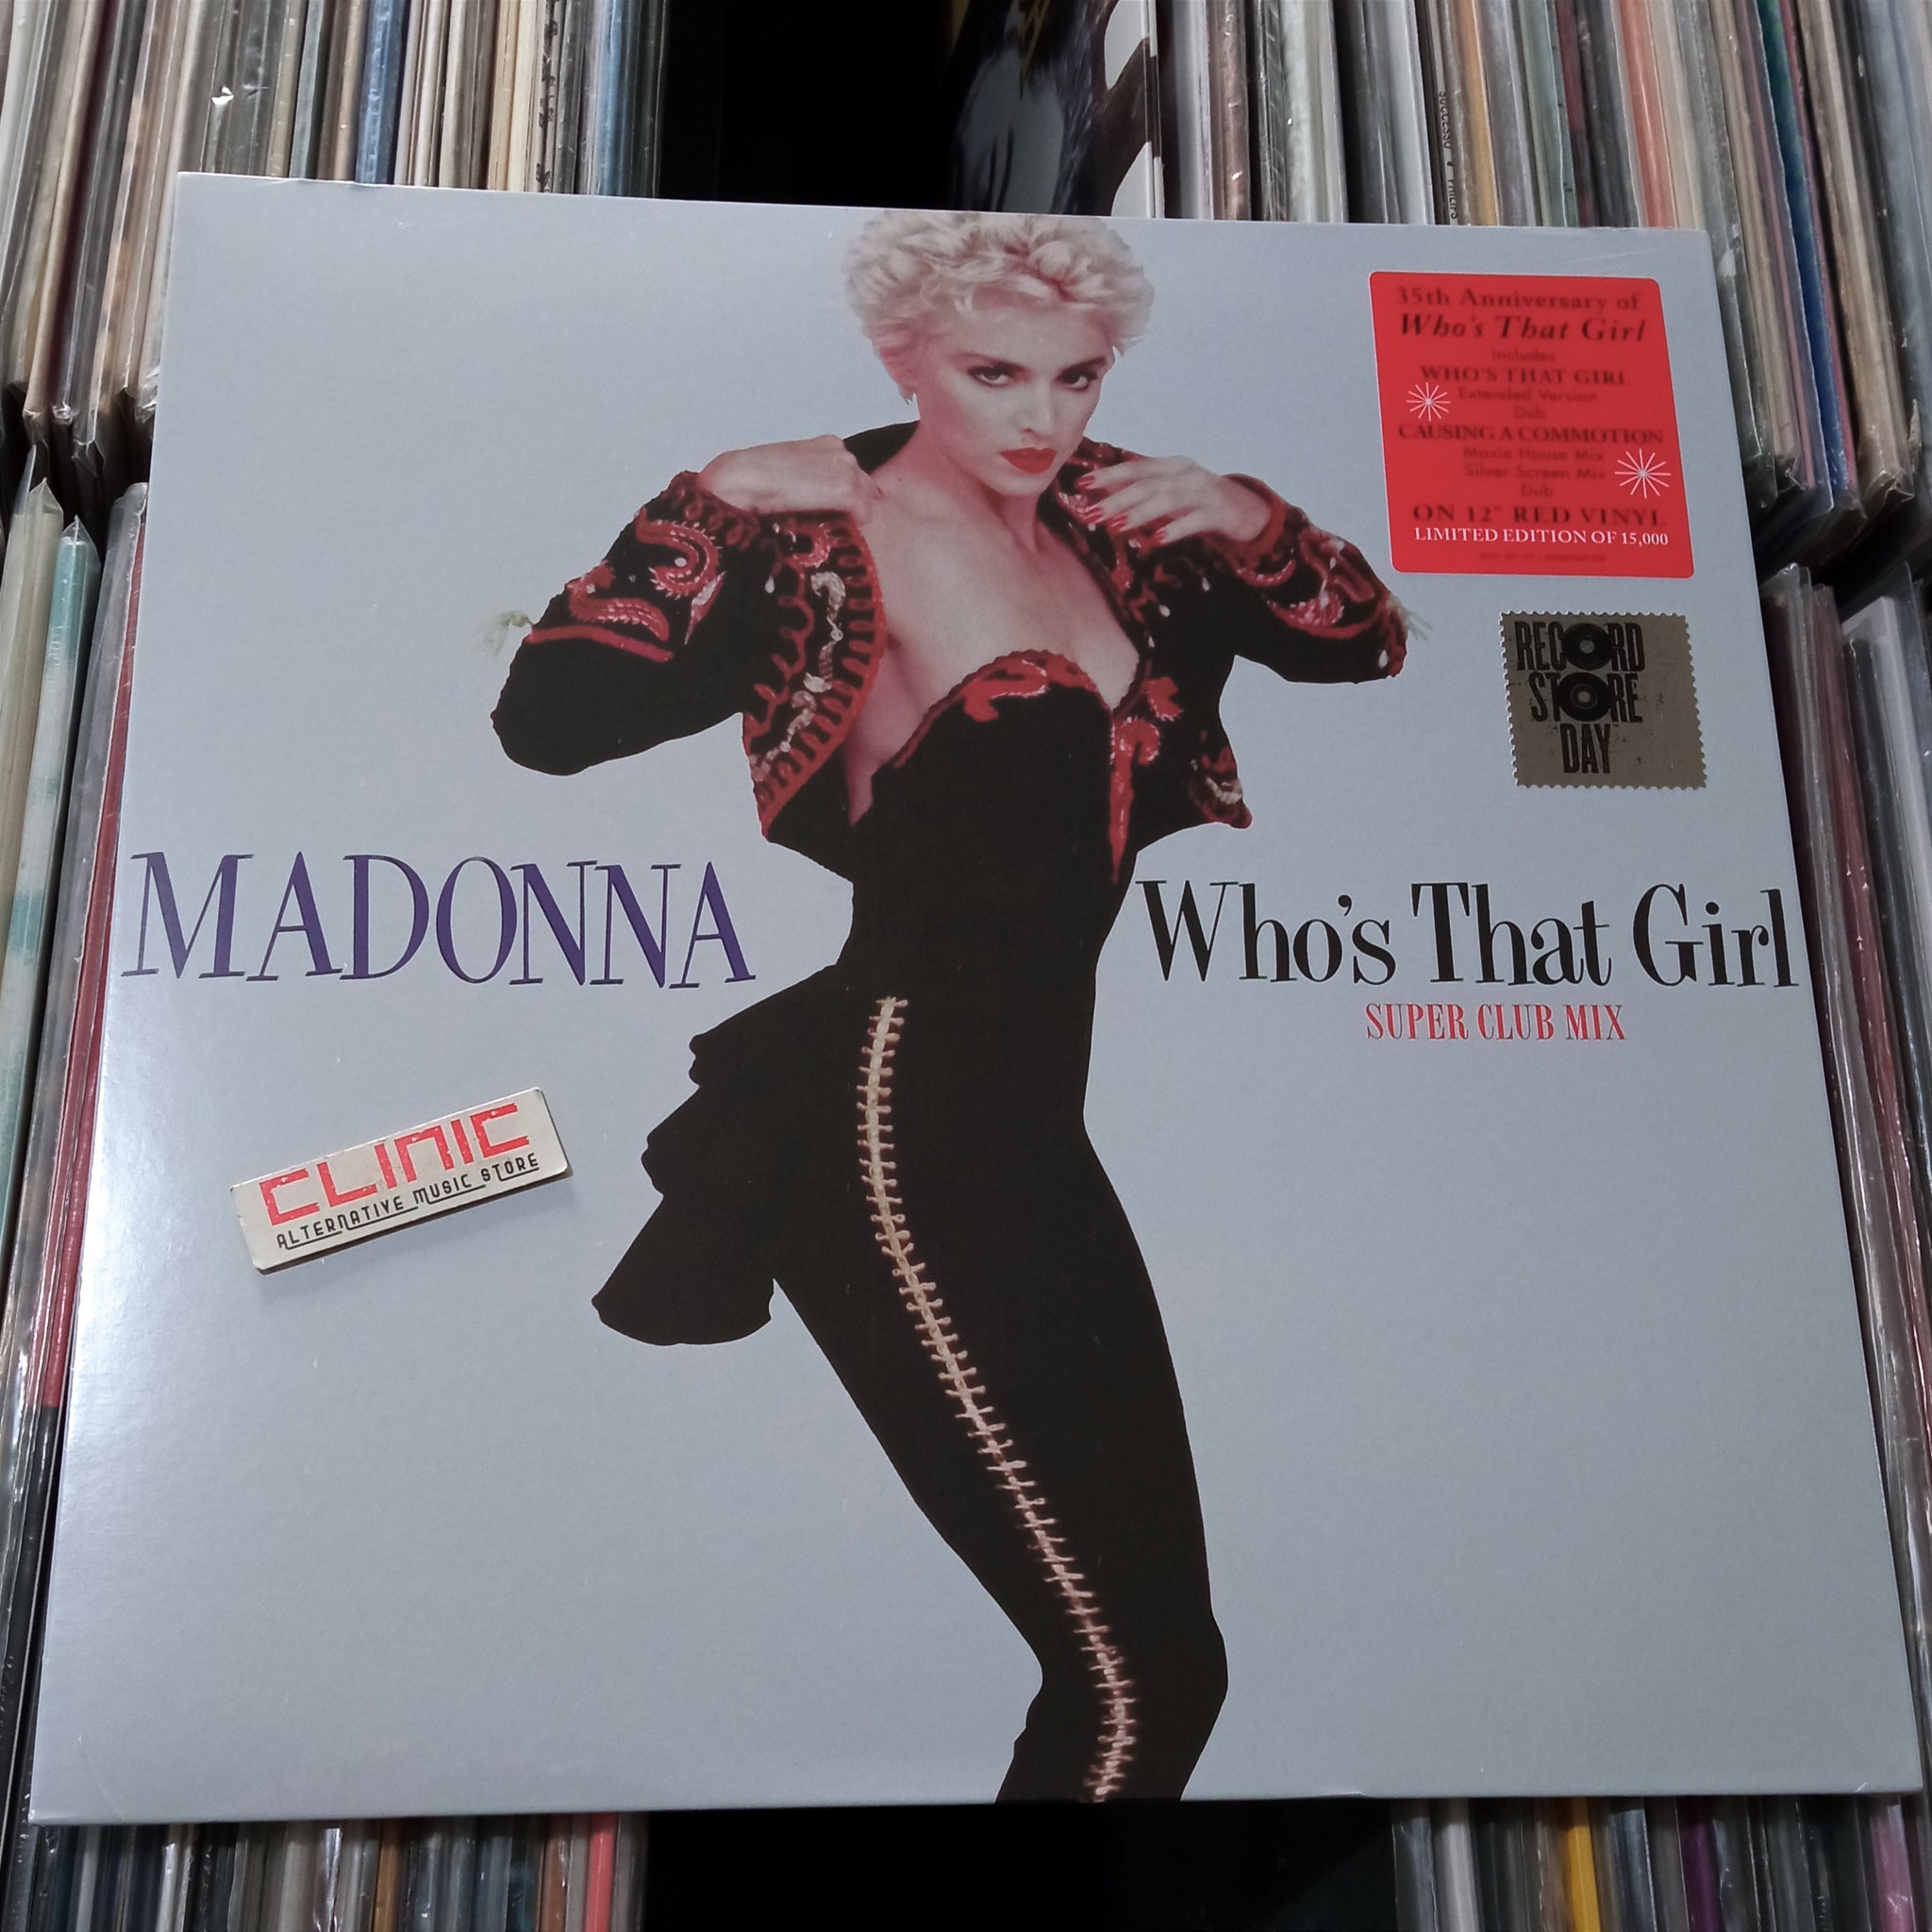 12" - MADONNA - WHO'S THAT GIRL (Super Club Mix) - Record Store Day